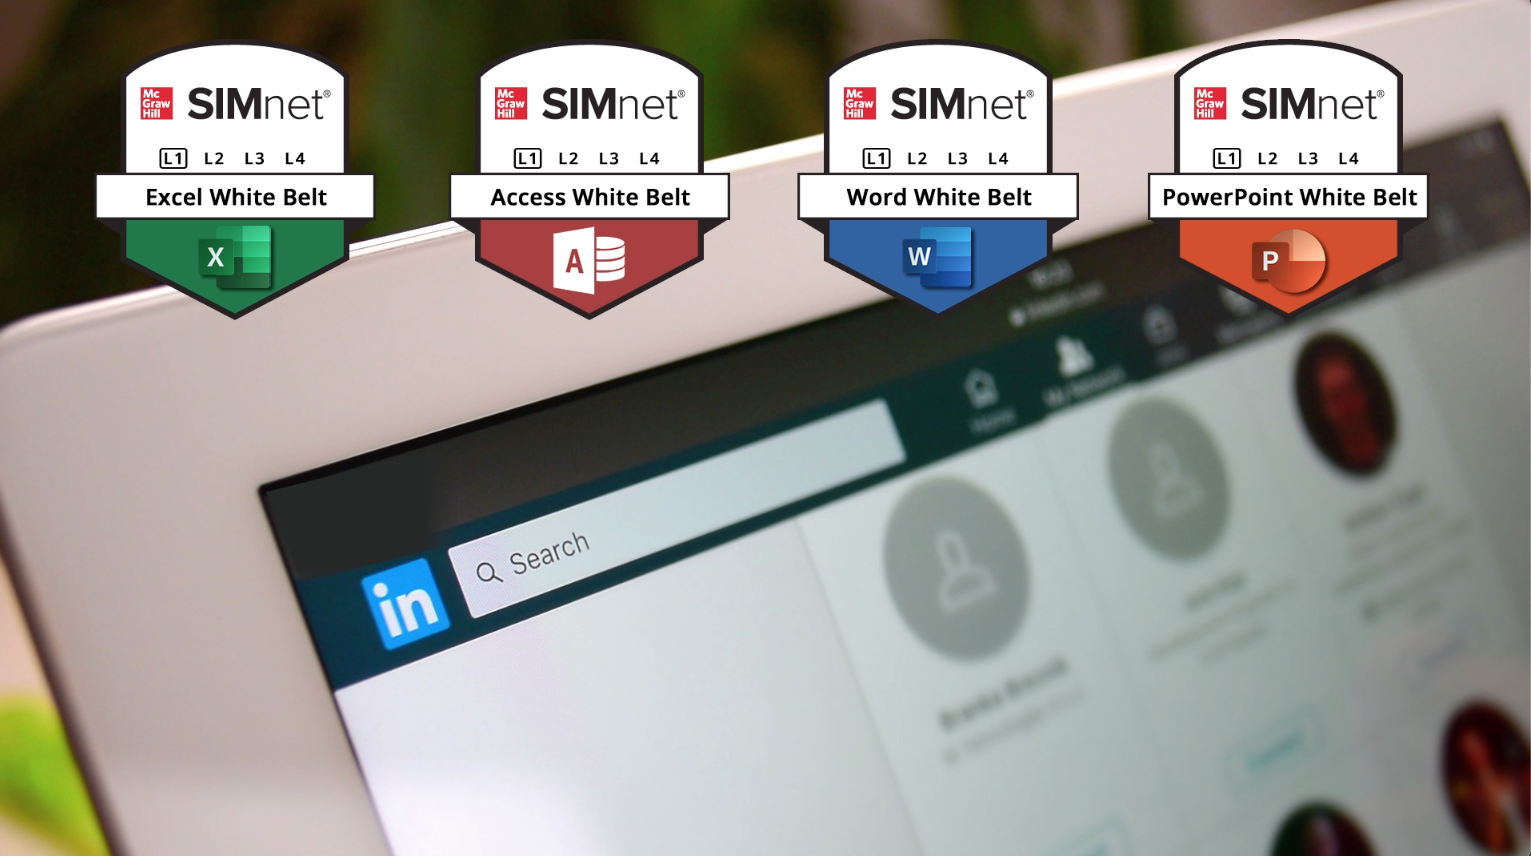 SIMnet: Training and Assessment for Microsoft Office Applications